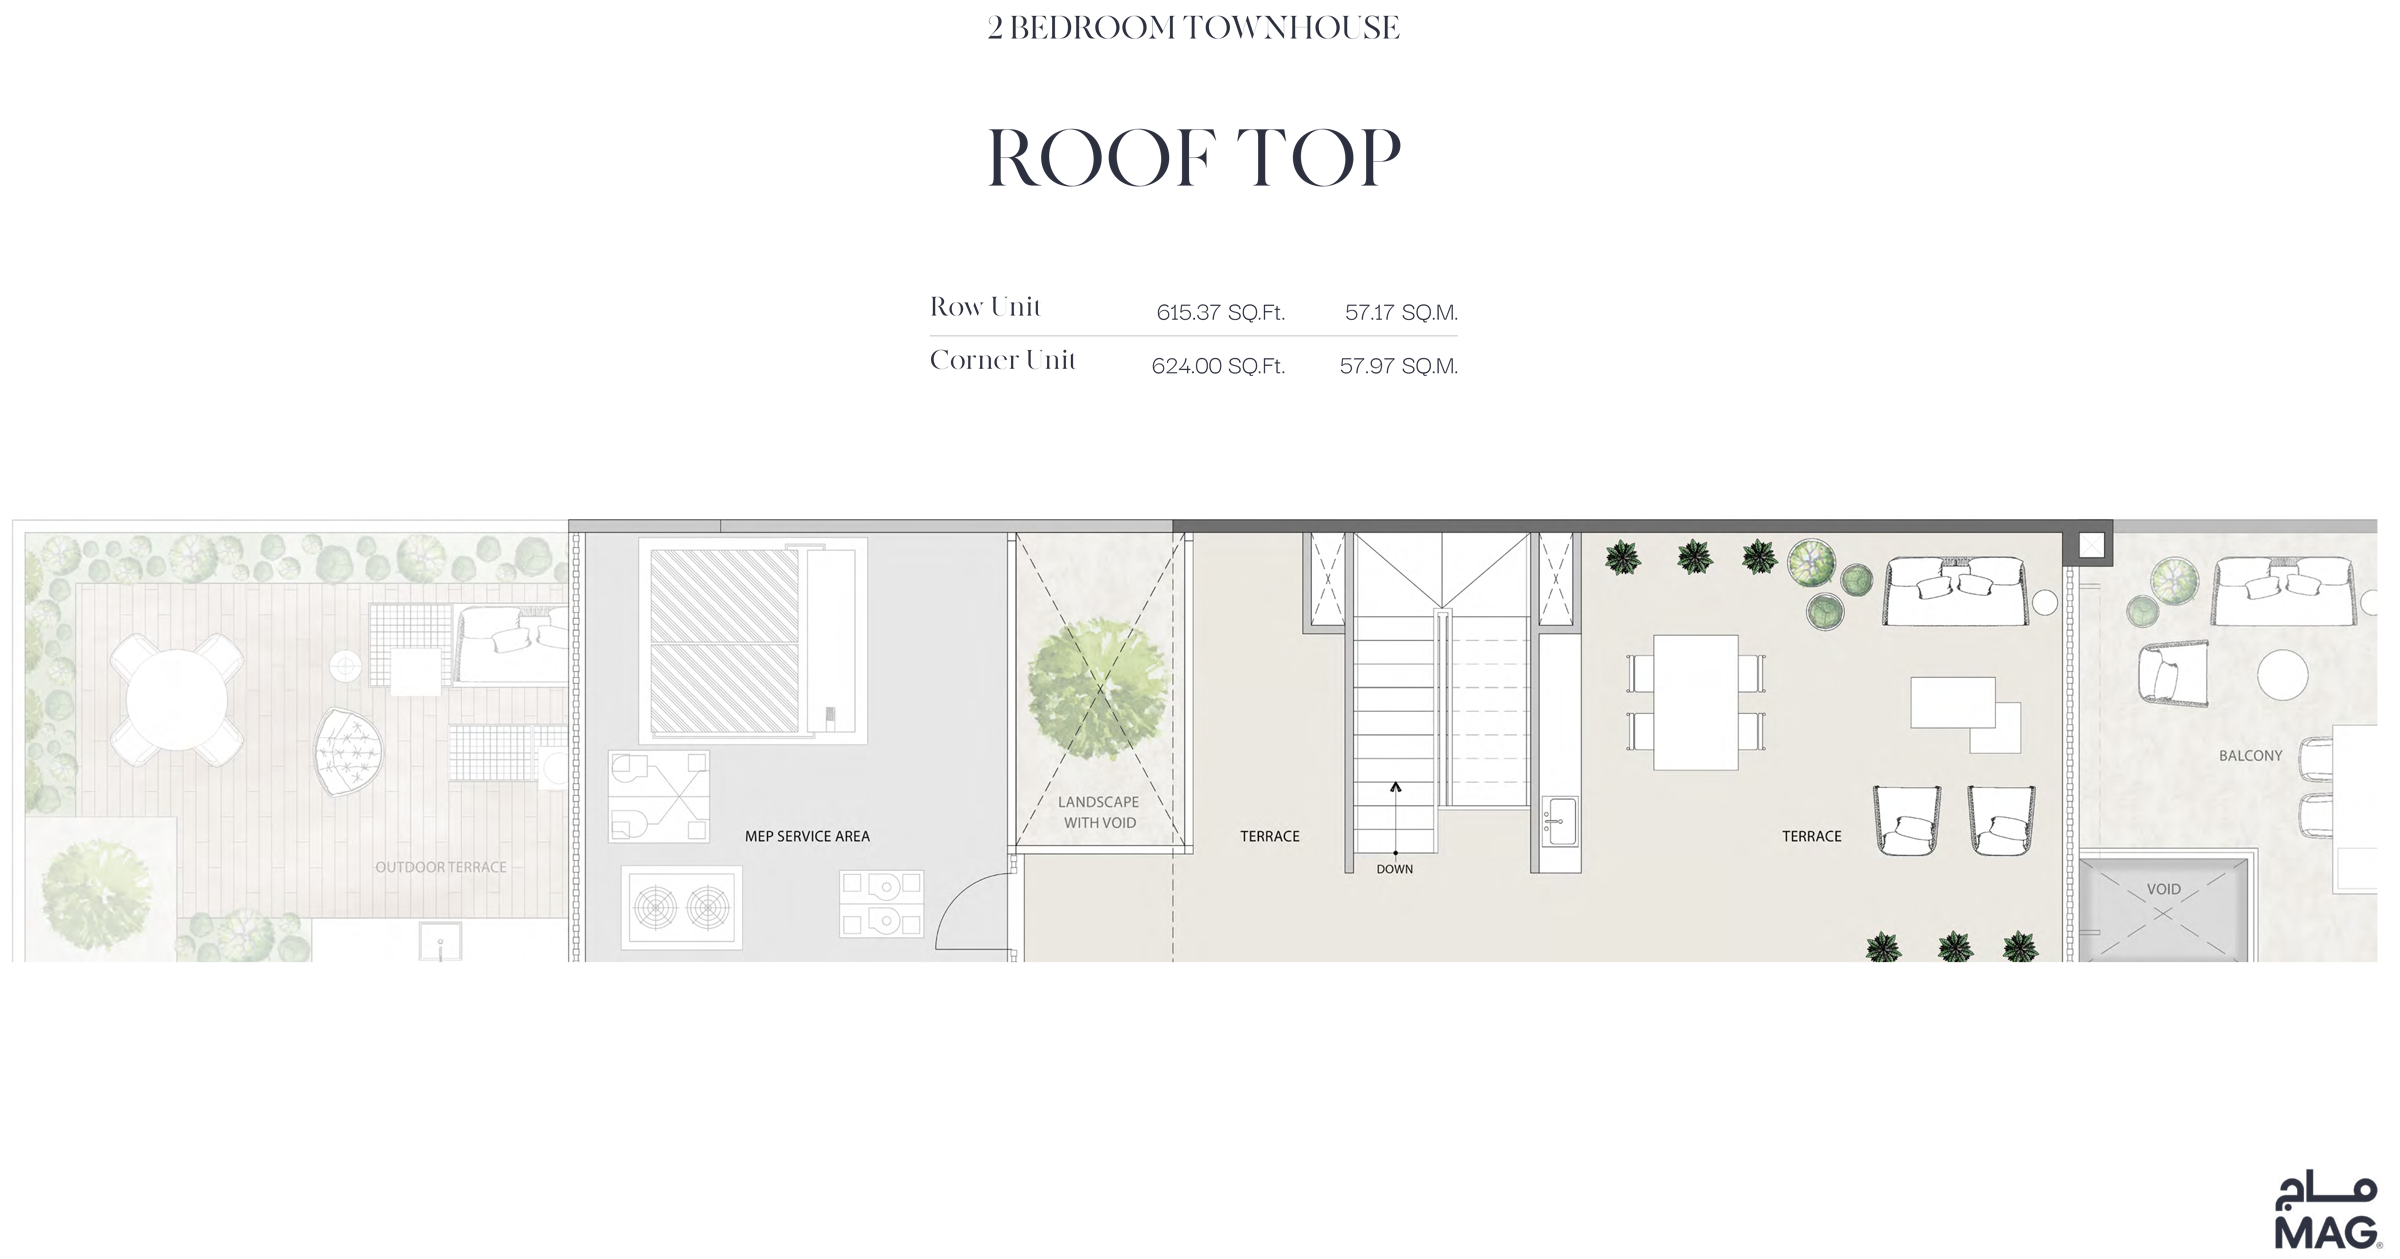 Roof Top, Row Unit